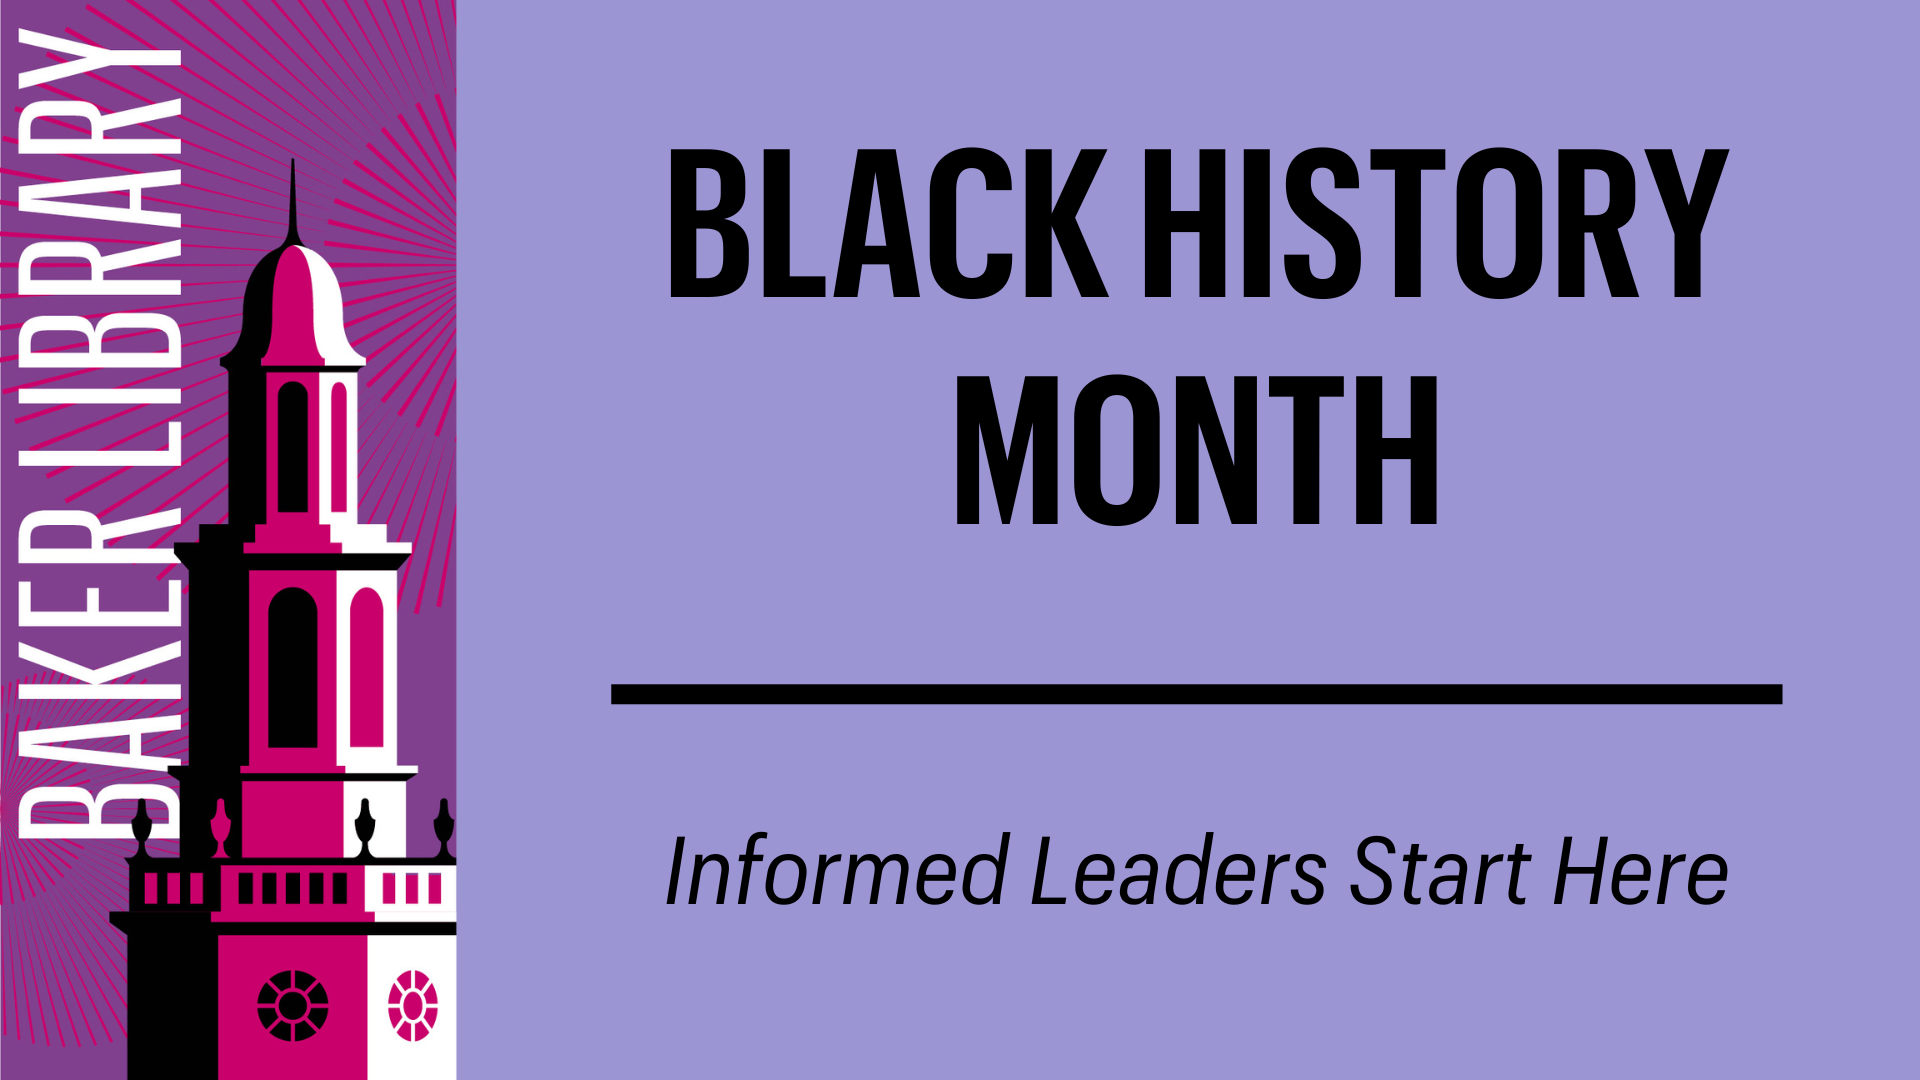 Banner that says "Black History Month" and "Informed Leaders Start Here"